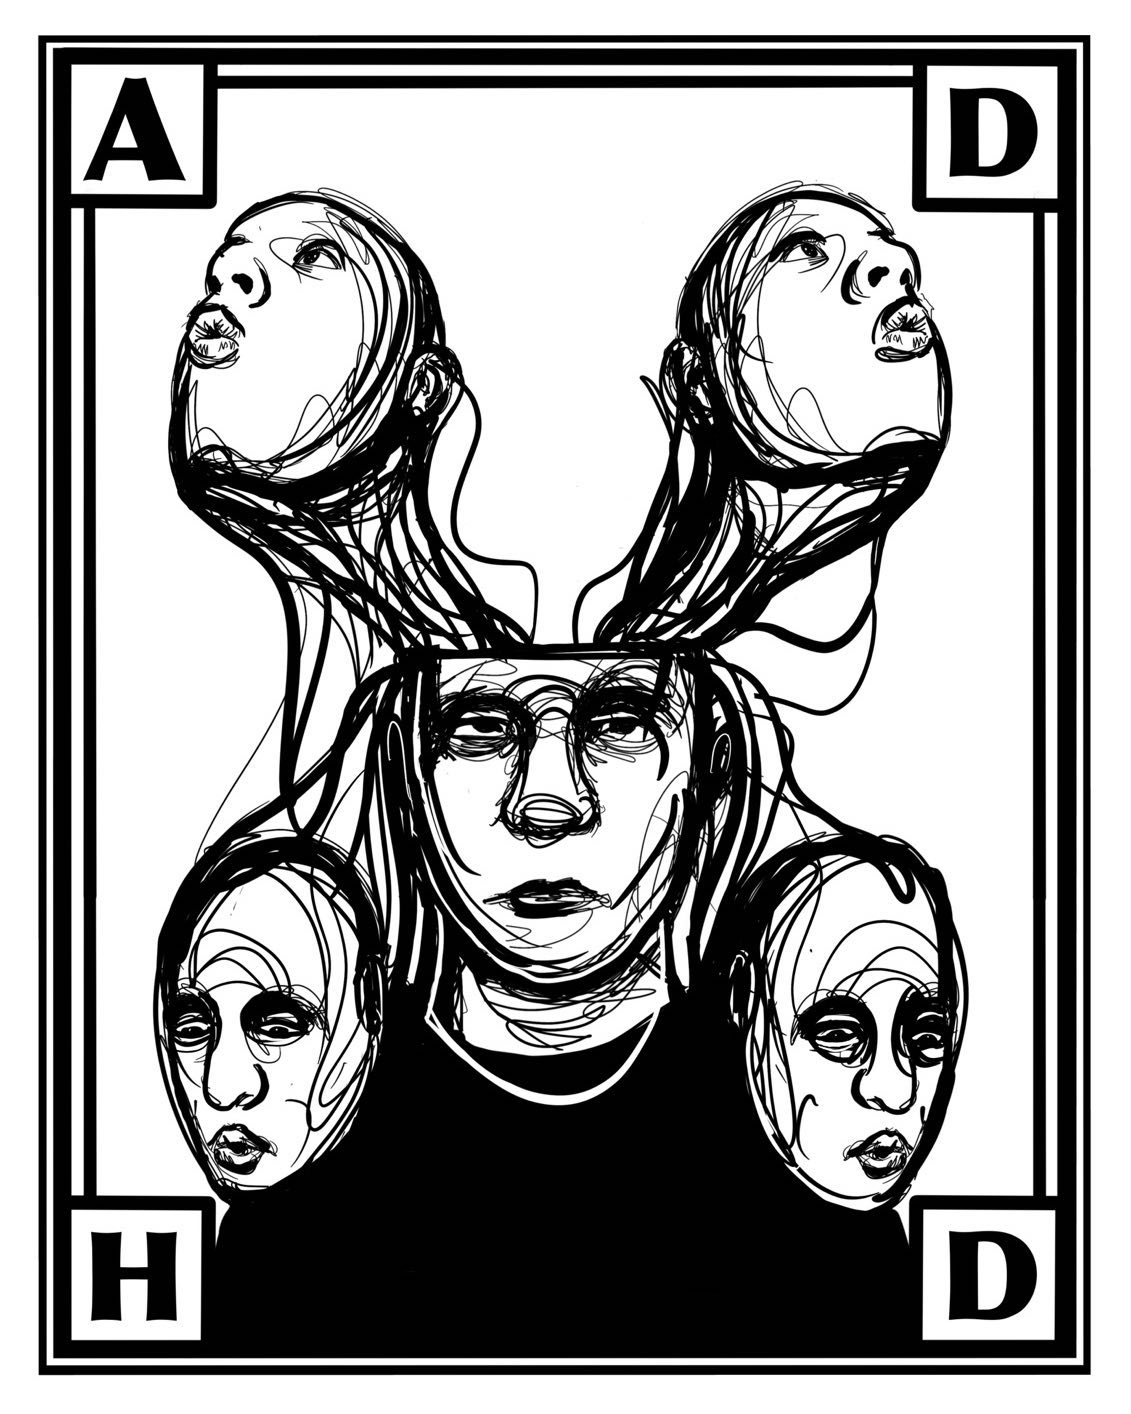 Feel reassured when I tell you that you have my full divided attention… 

This is an artistic representation of ADHD.

_